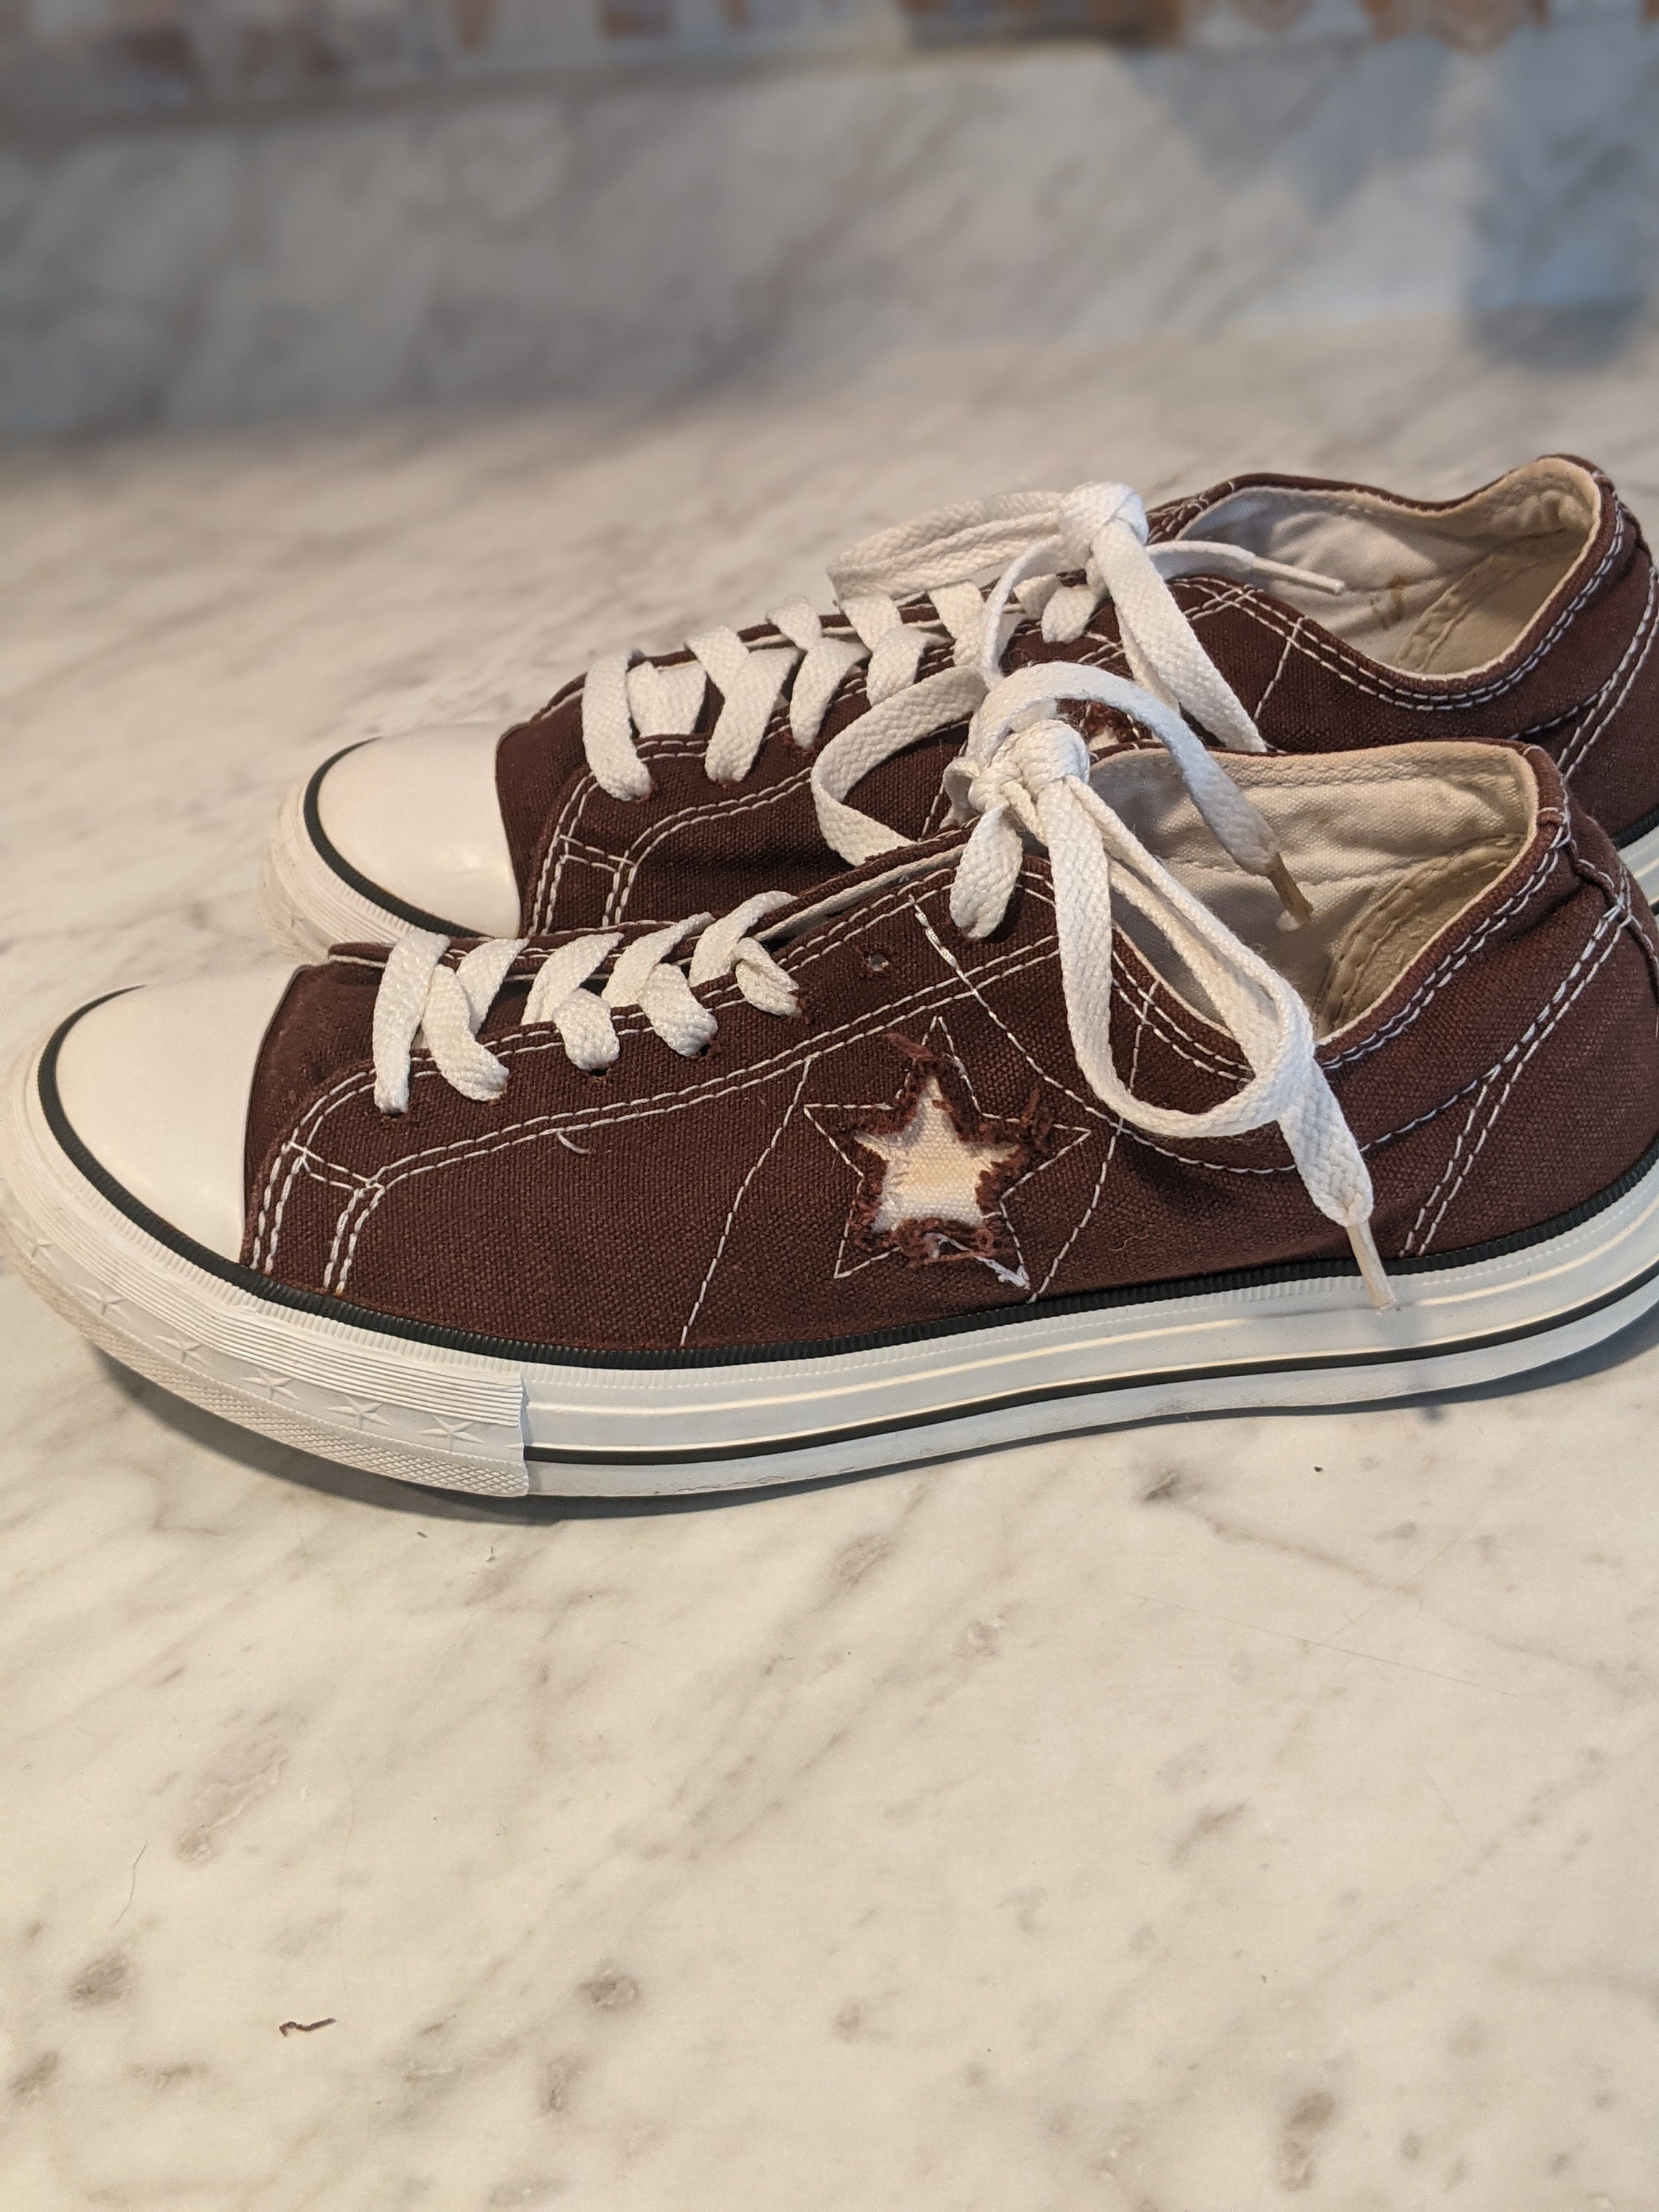 Brown One Star Top Canvas Shoes Talla 9 Mujer Etsy España